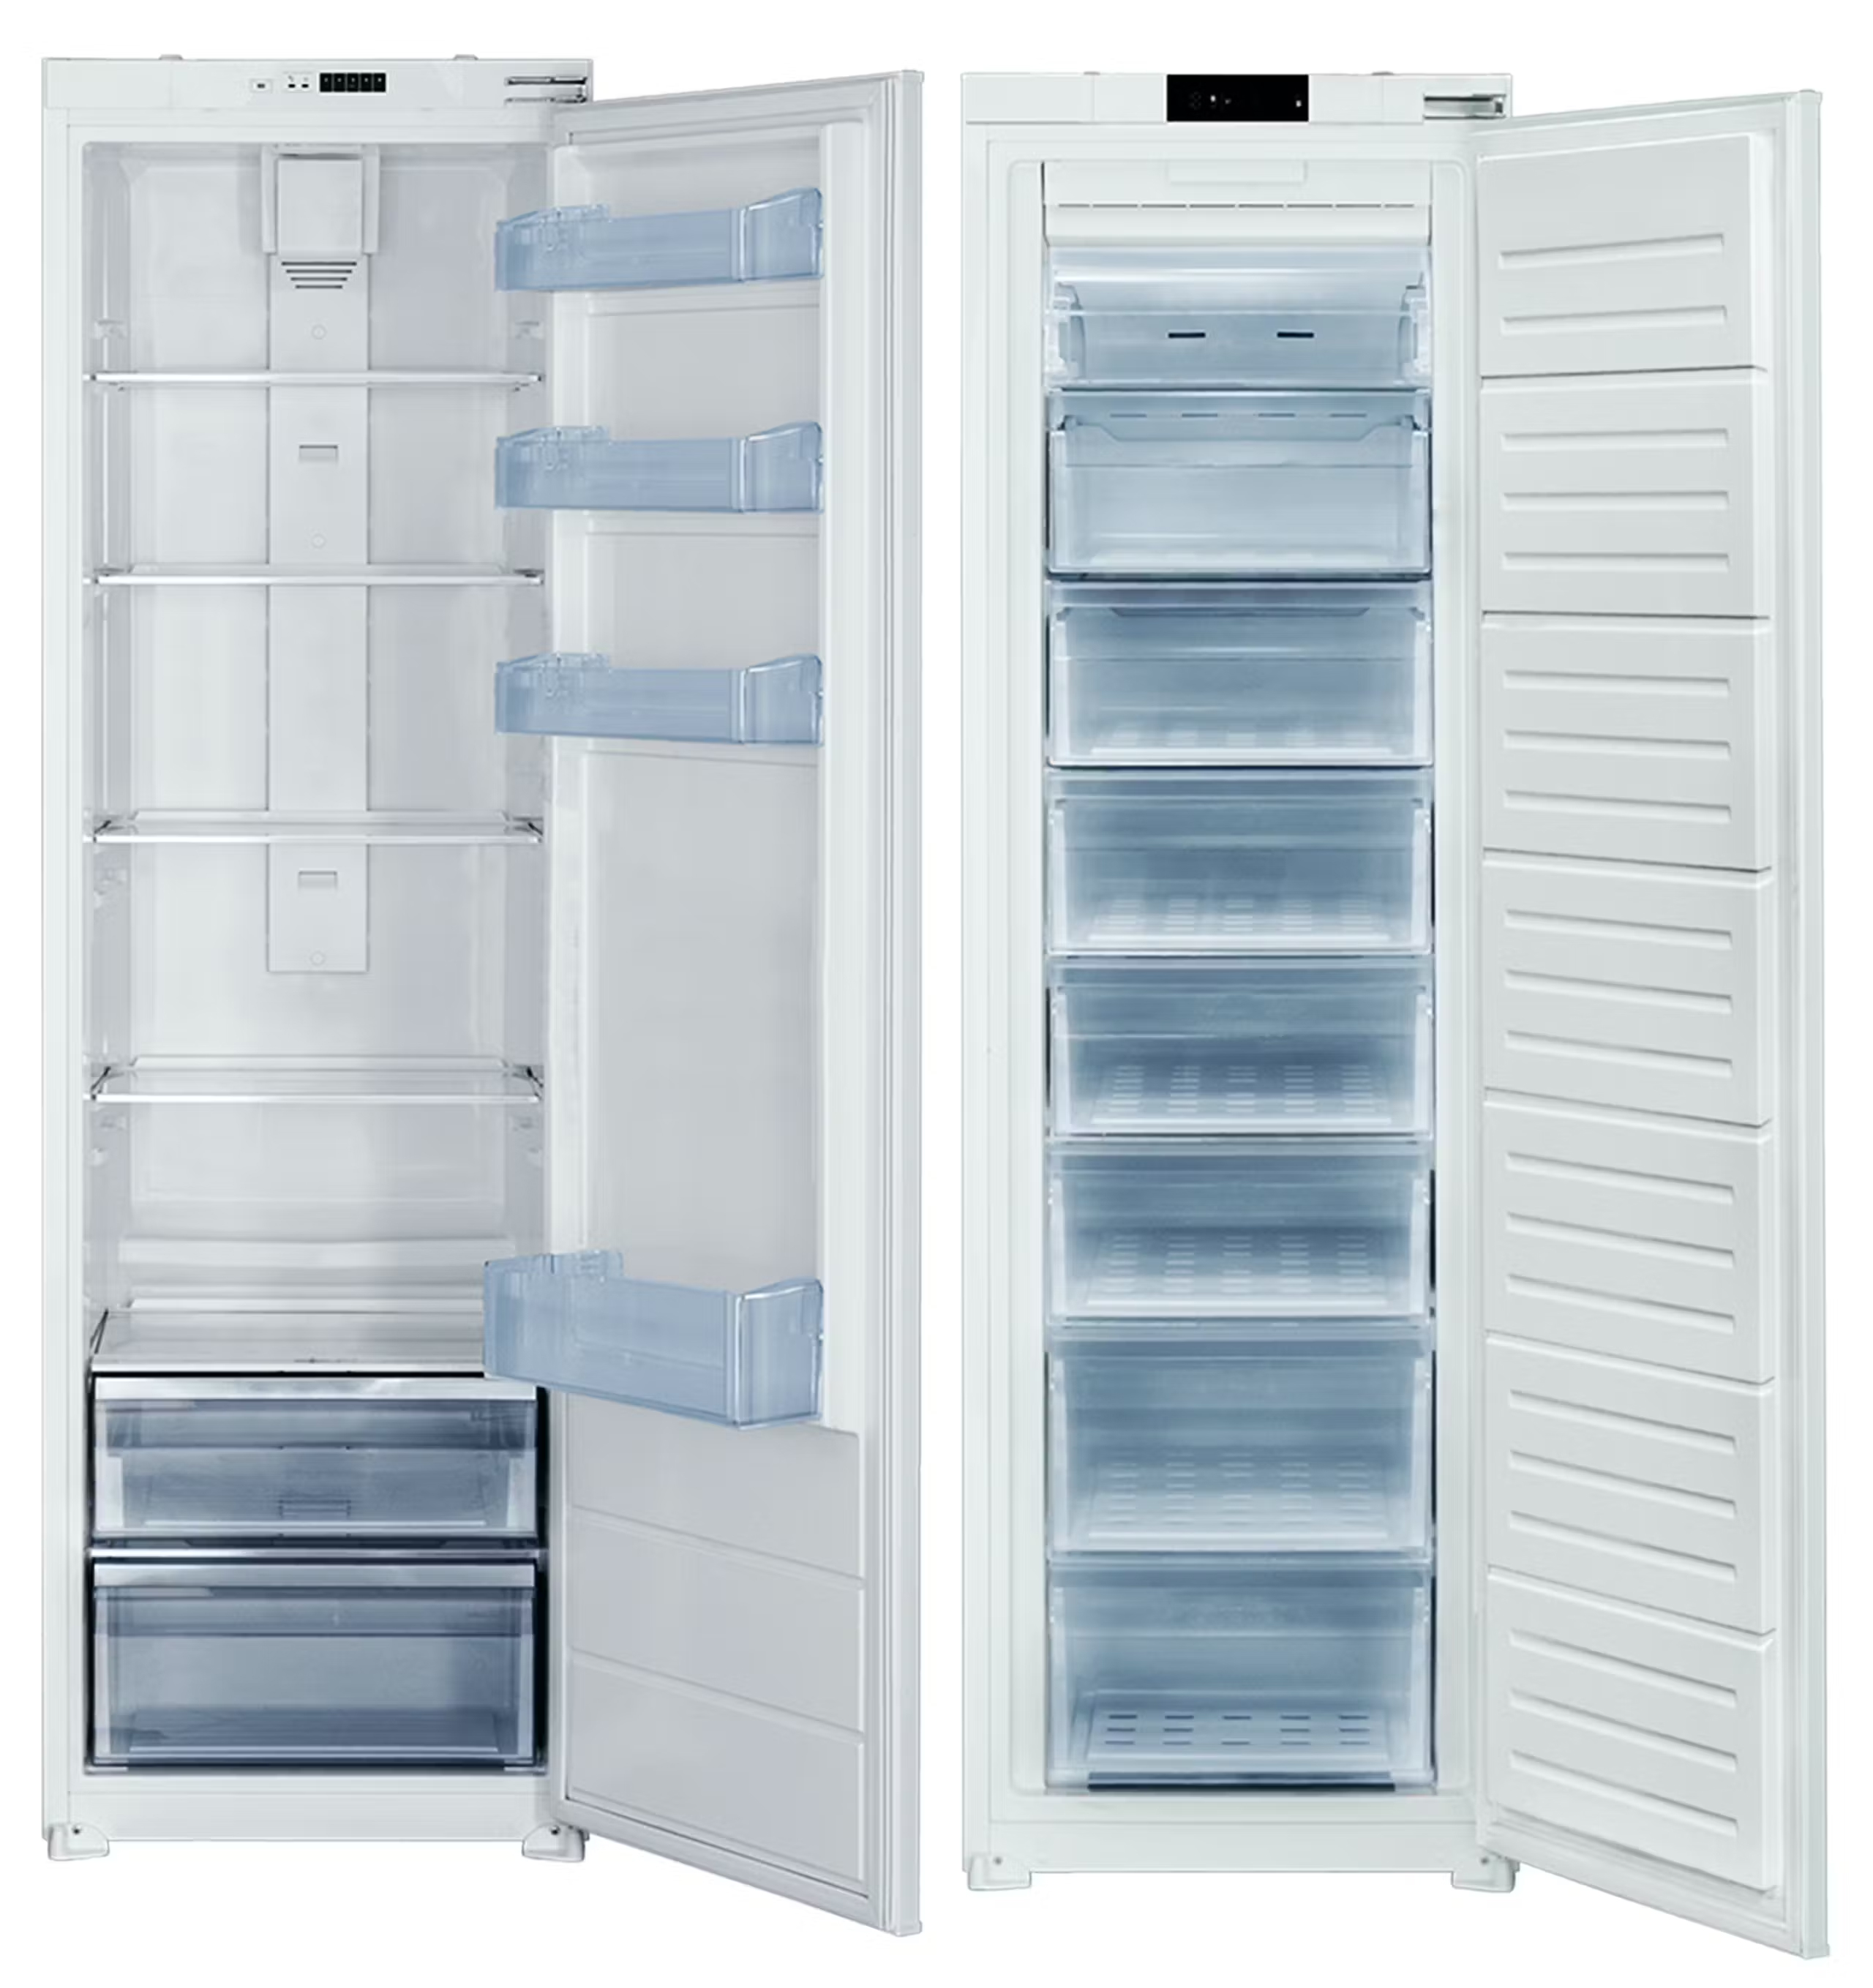 Edesa tall fridge and freezer pack from MyAppliances